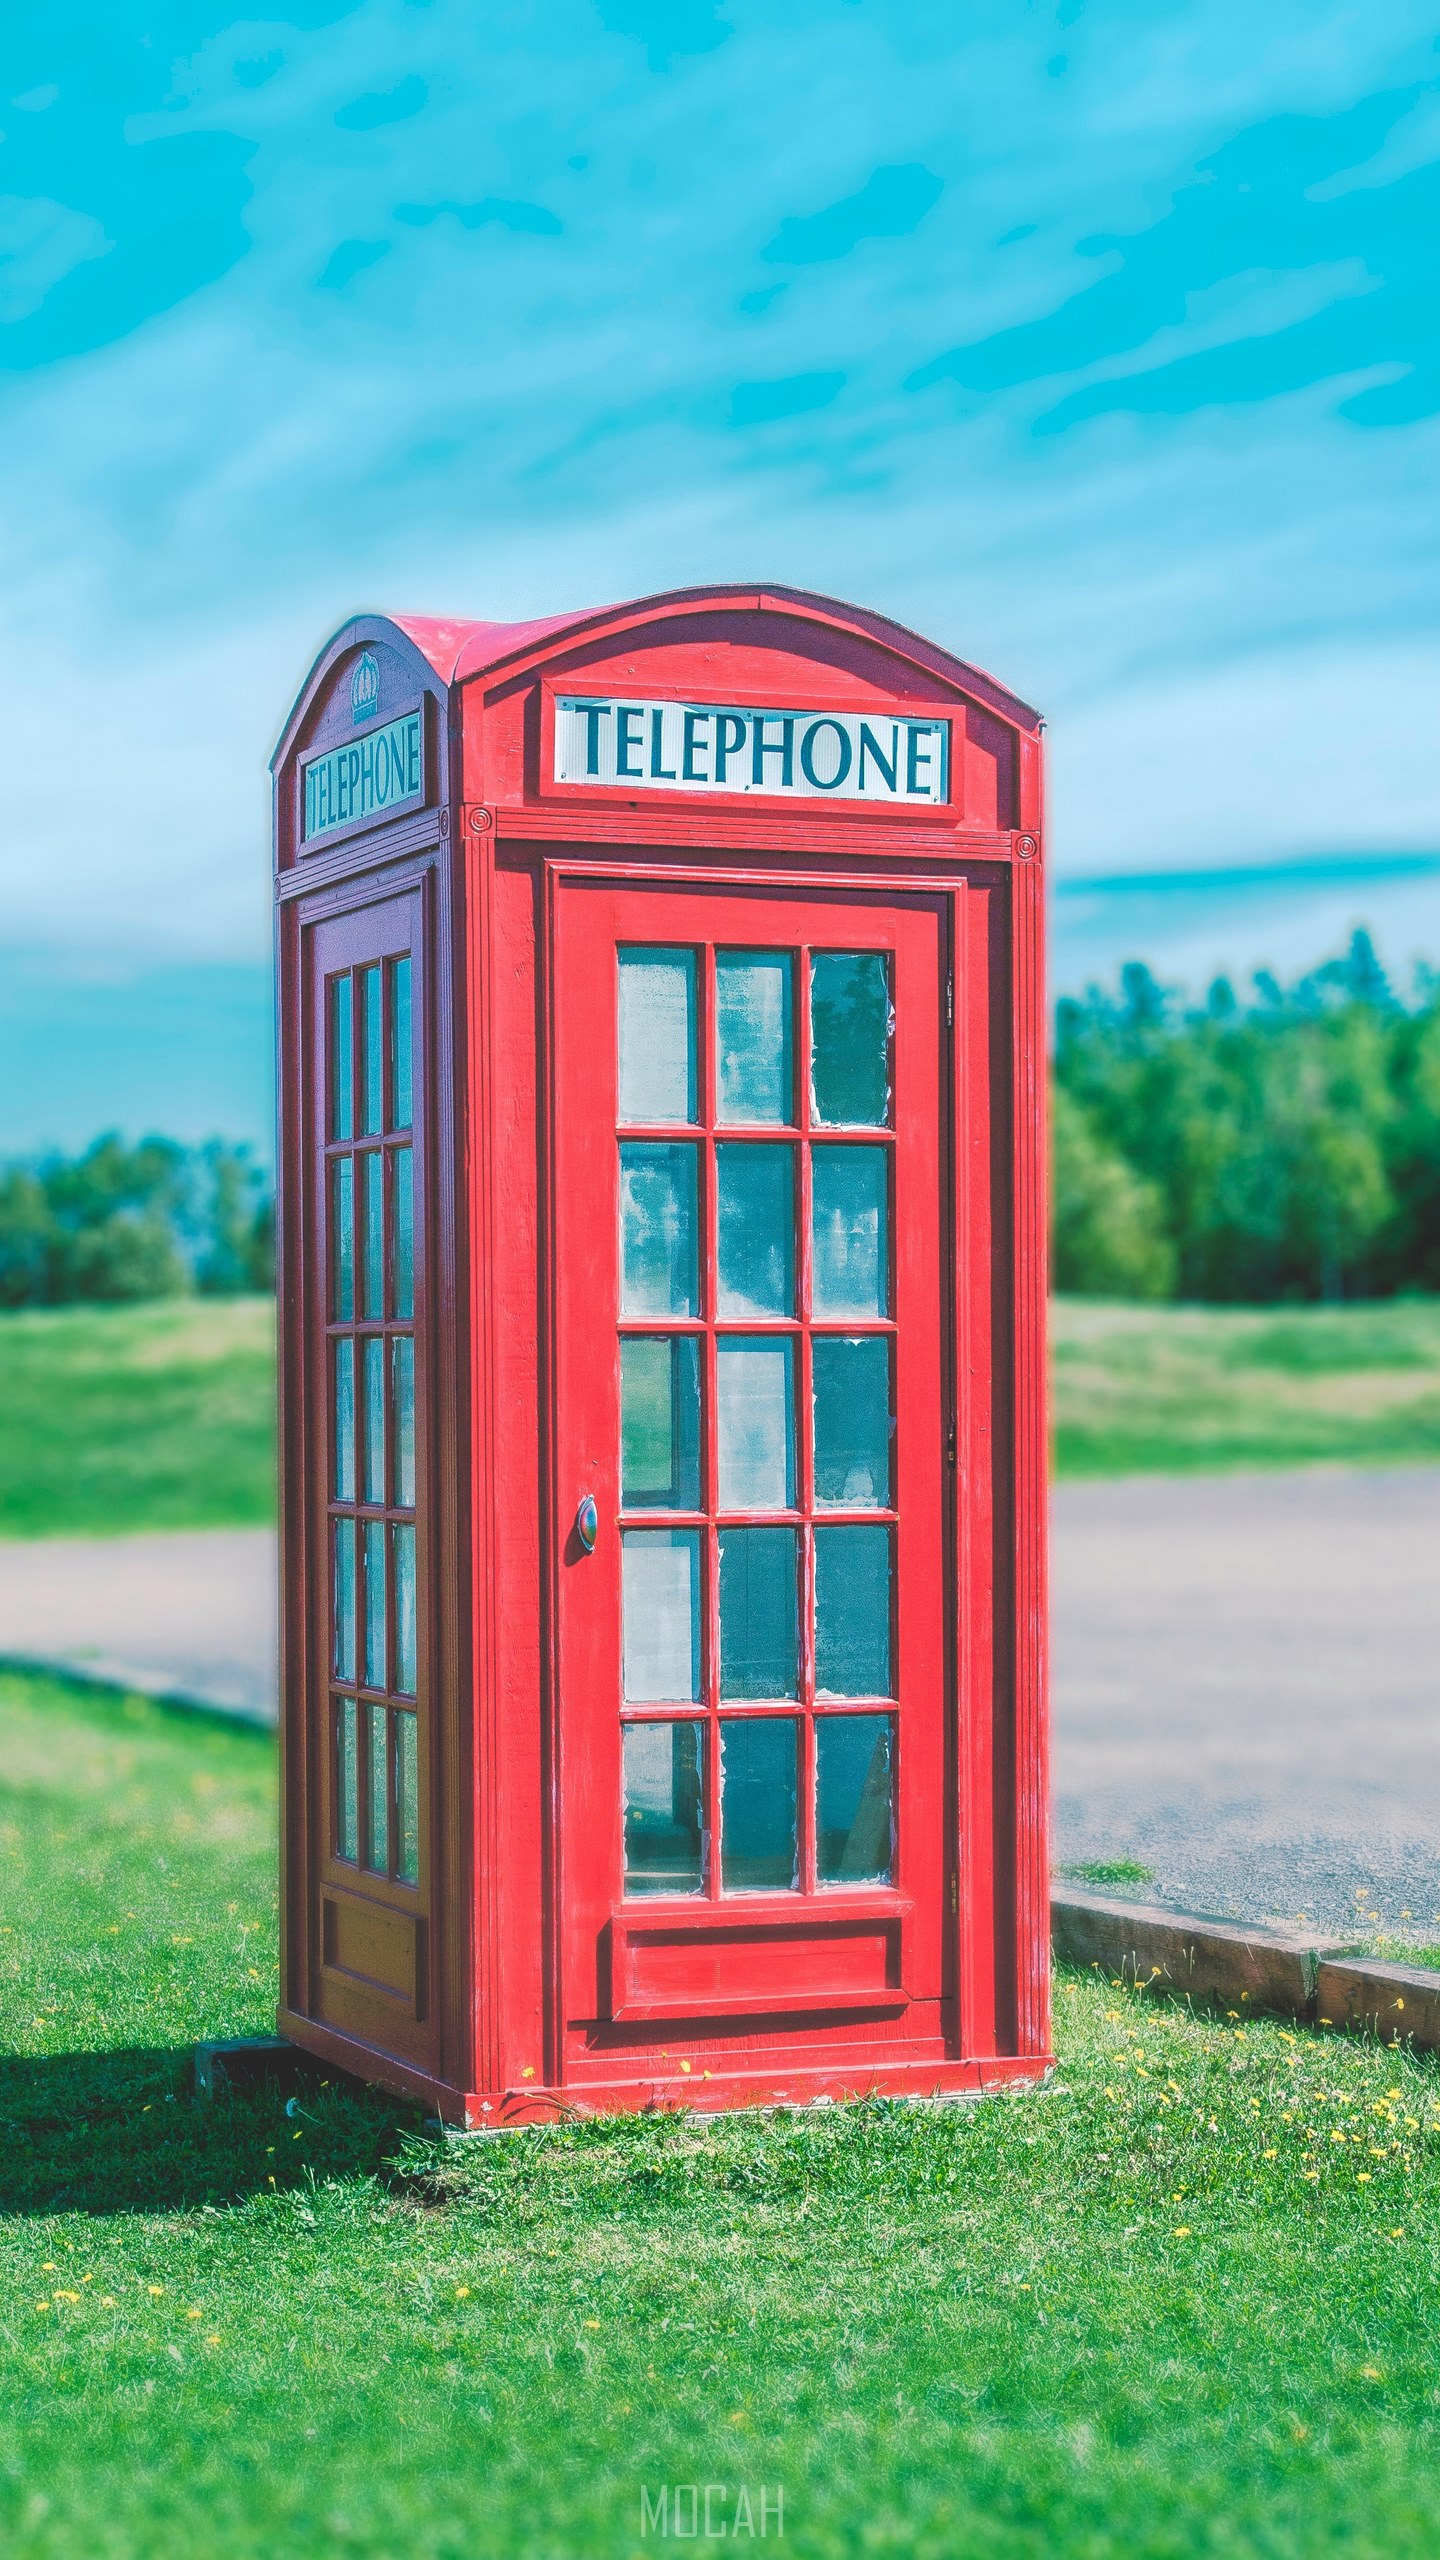 A red telephone booth sits on green grass against a blue sky telephone booth in grass htc wallpaper download x